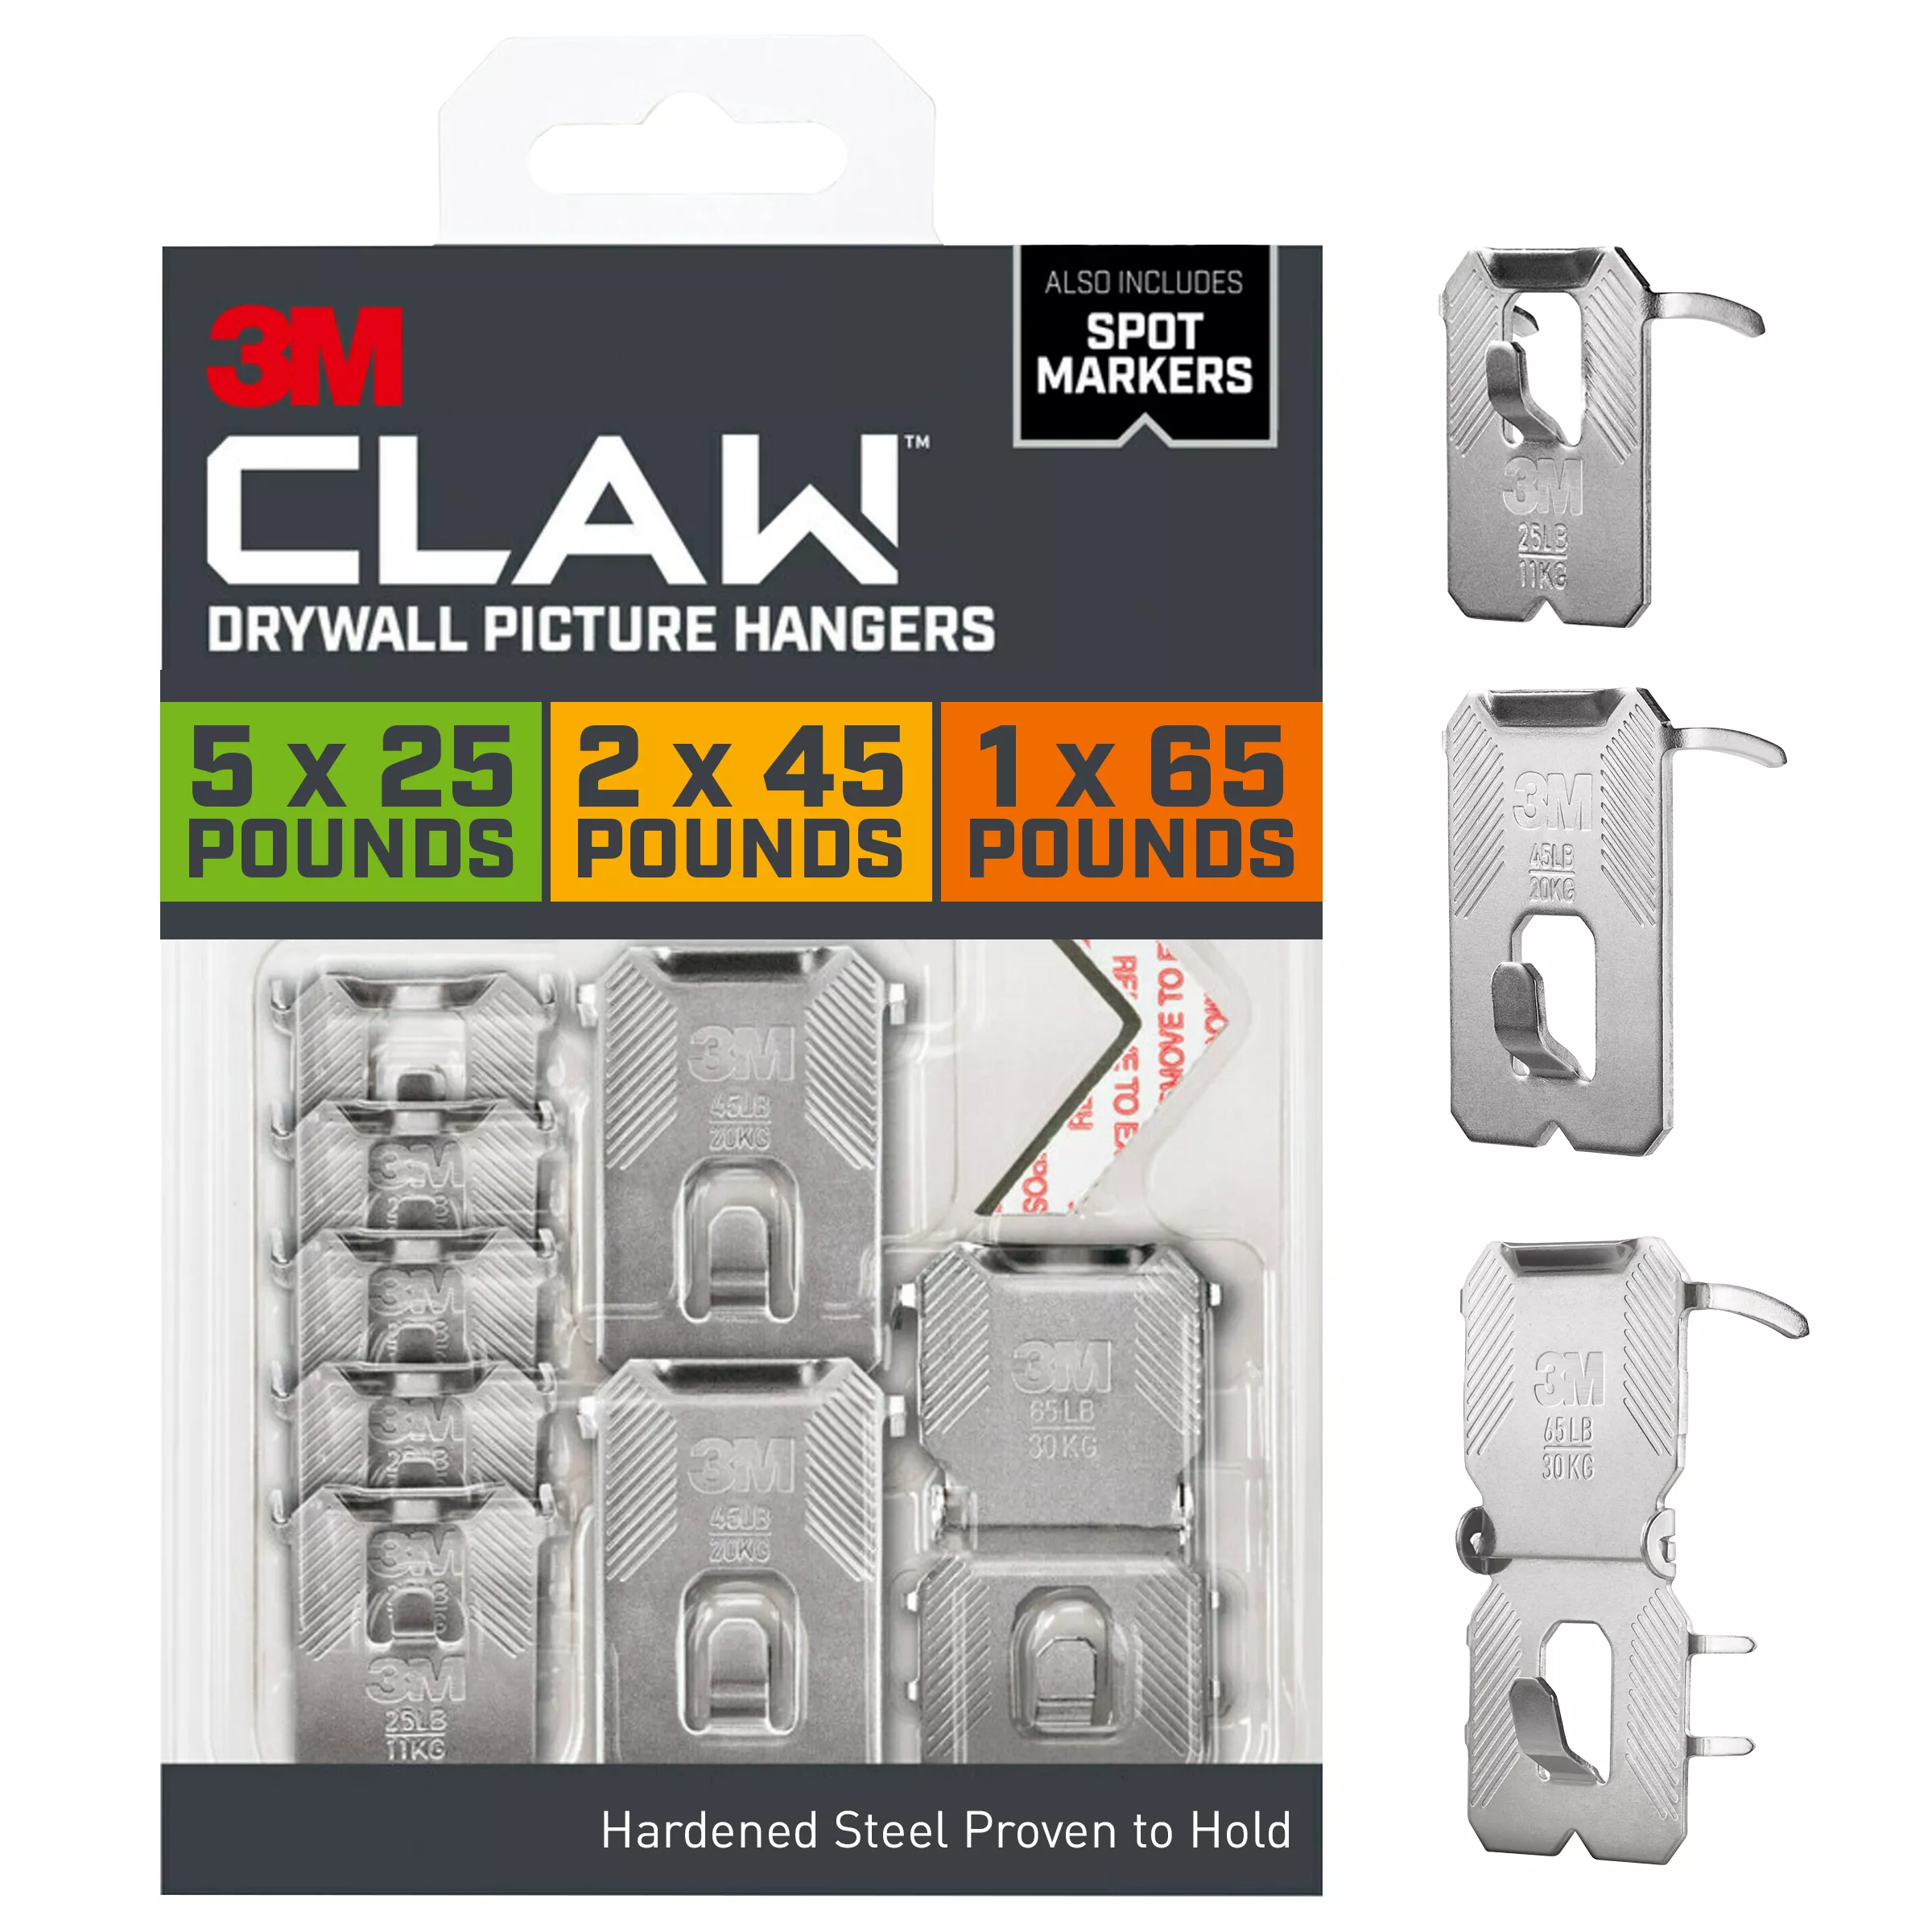 3M CLAW™ Drywall Picture Hangers with Temporary Spot Markers 3PHKITM-8ES, Assorted